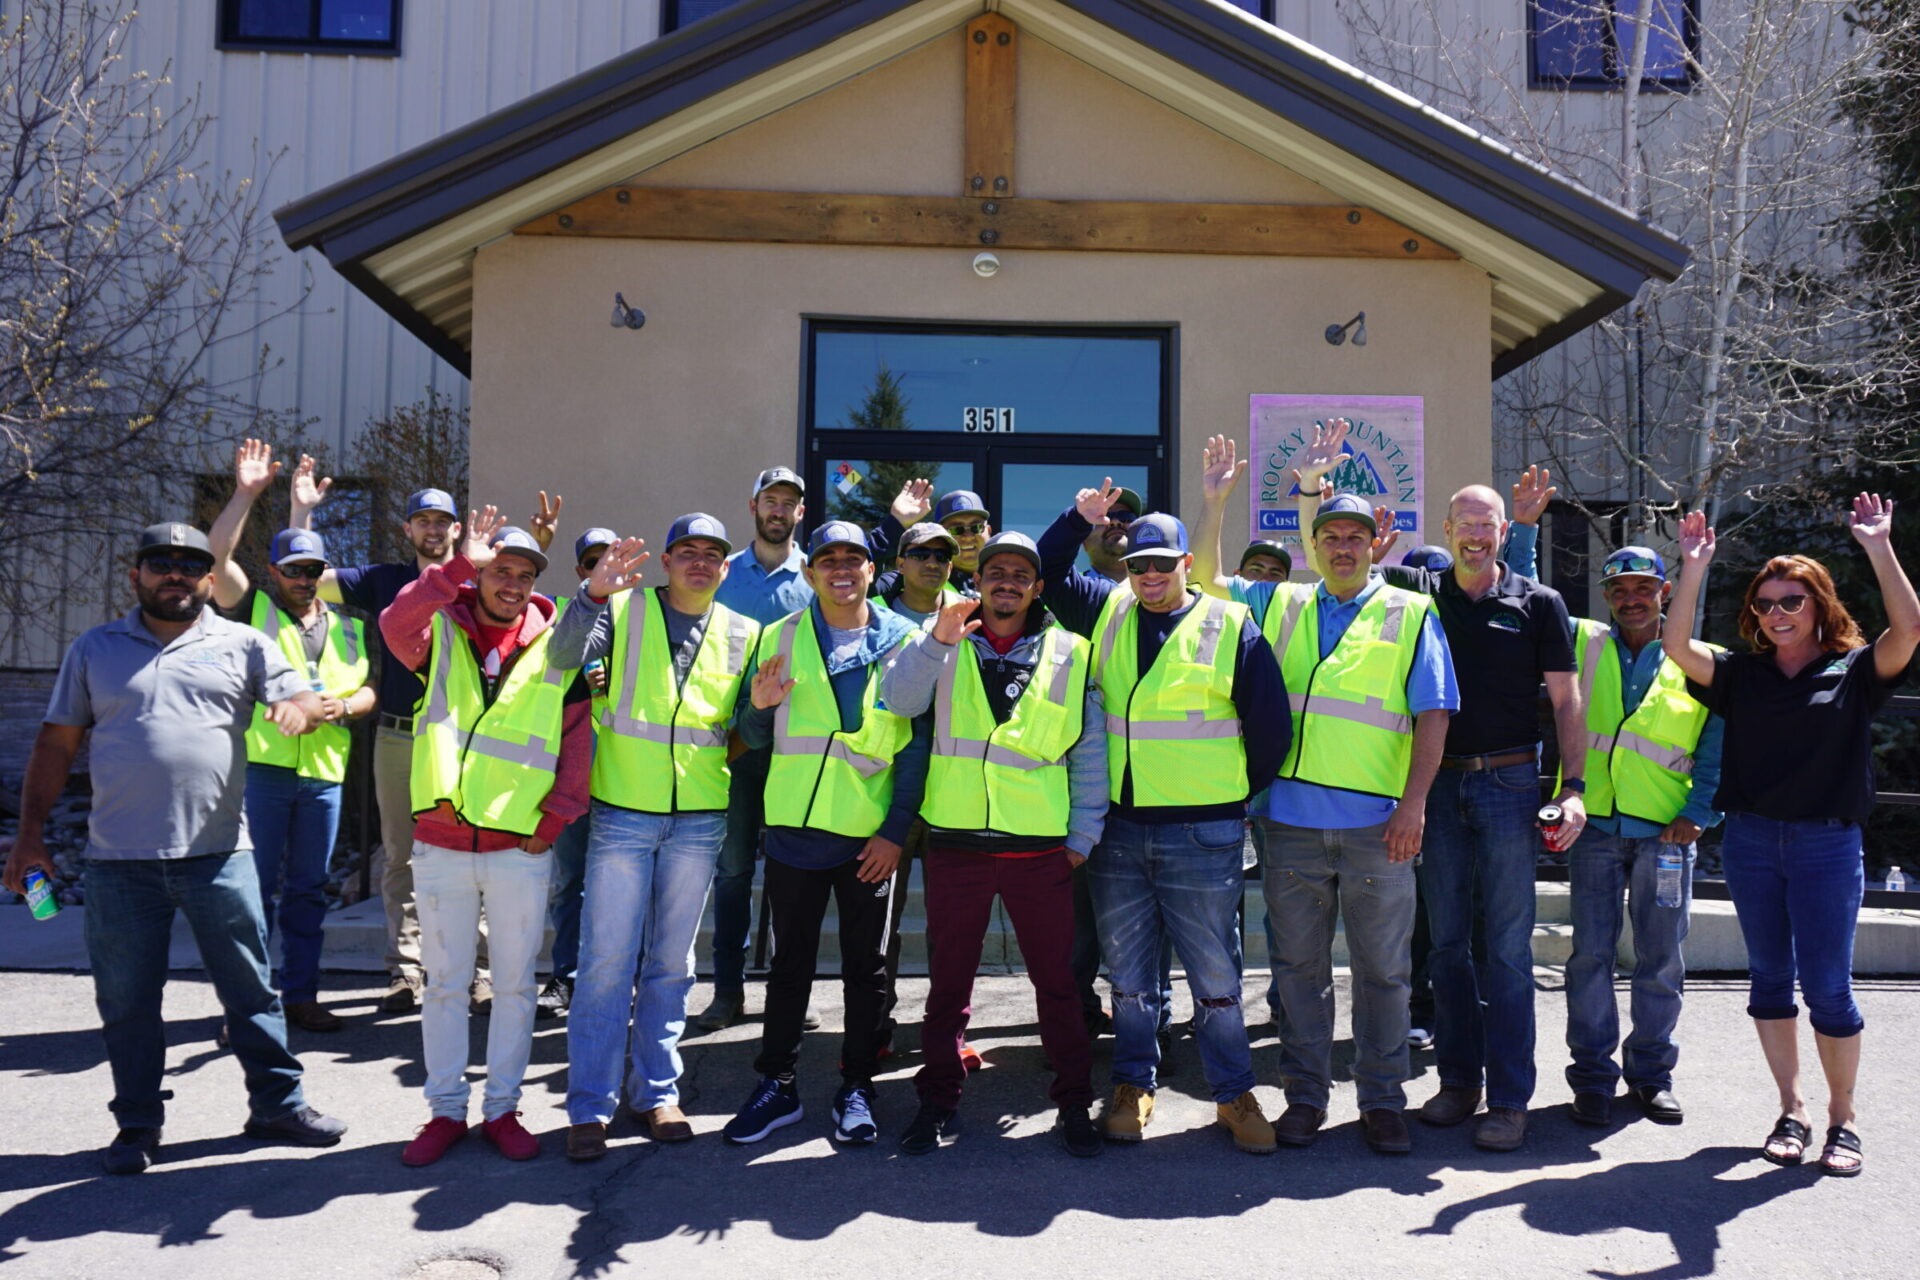 A group of happy people in reflective safety vests and caps posing in front of a building with trees and clear blue sky. Some are waving.